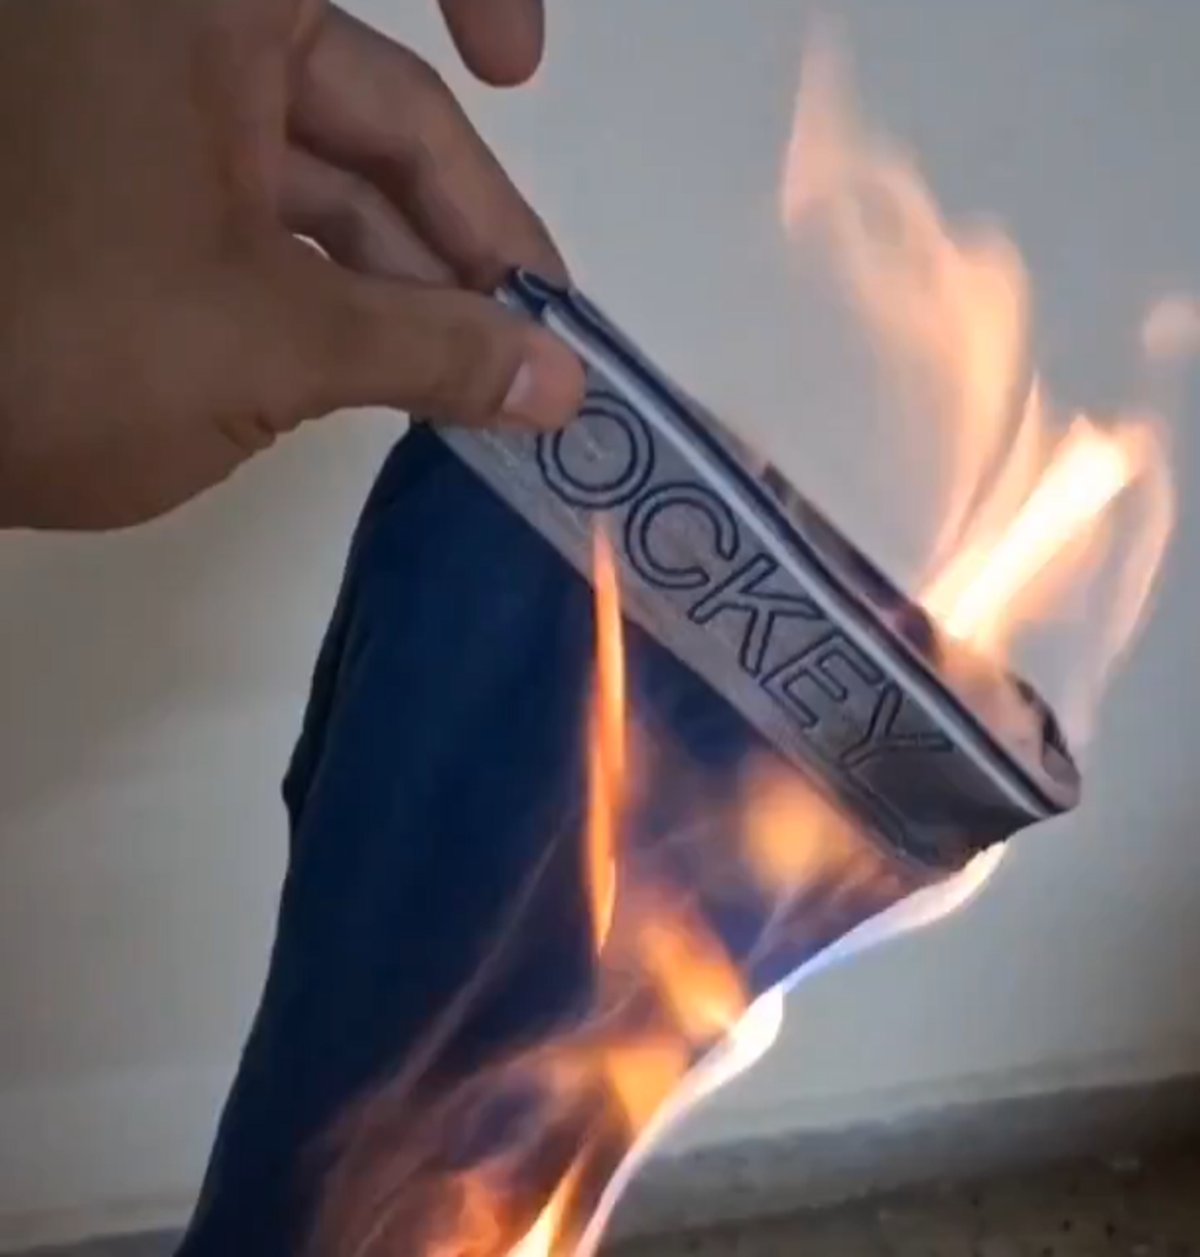 Indian mens rights group burns underwear to protest laws that favour women [Video]